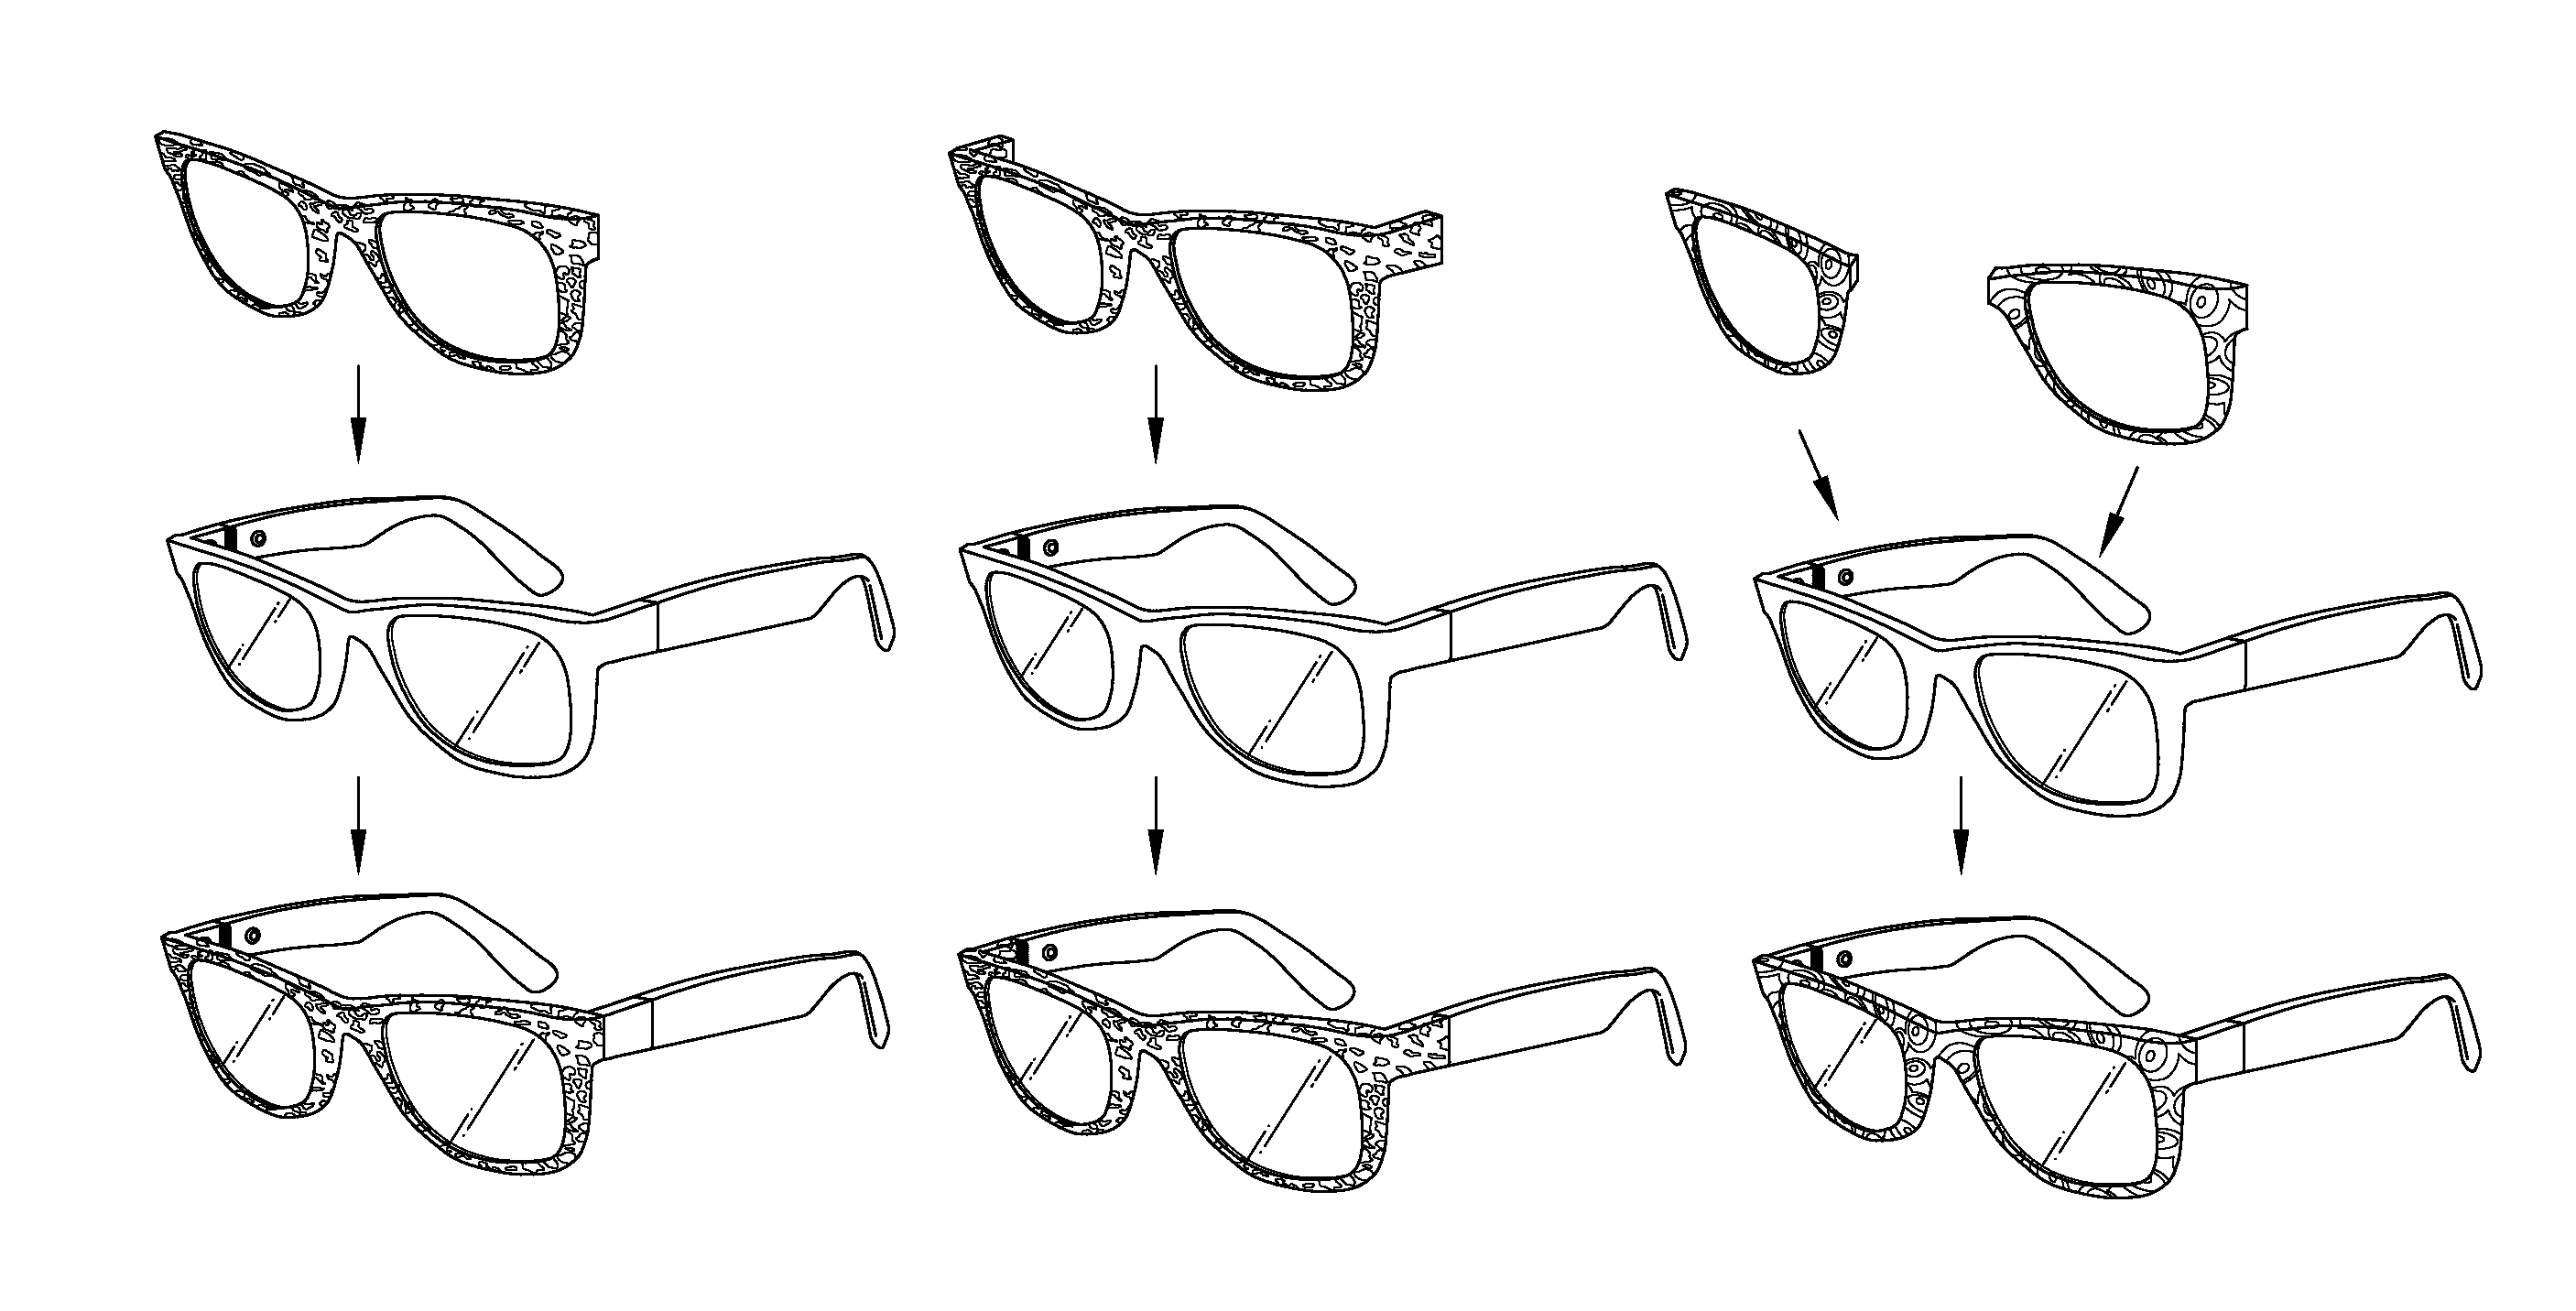 Componentized Eyewear Systems And Methods of Using the Same